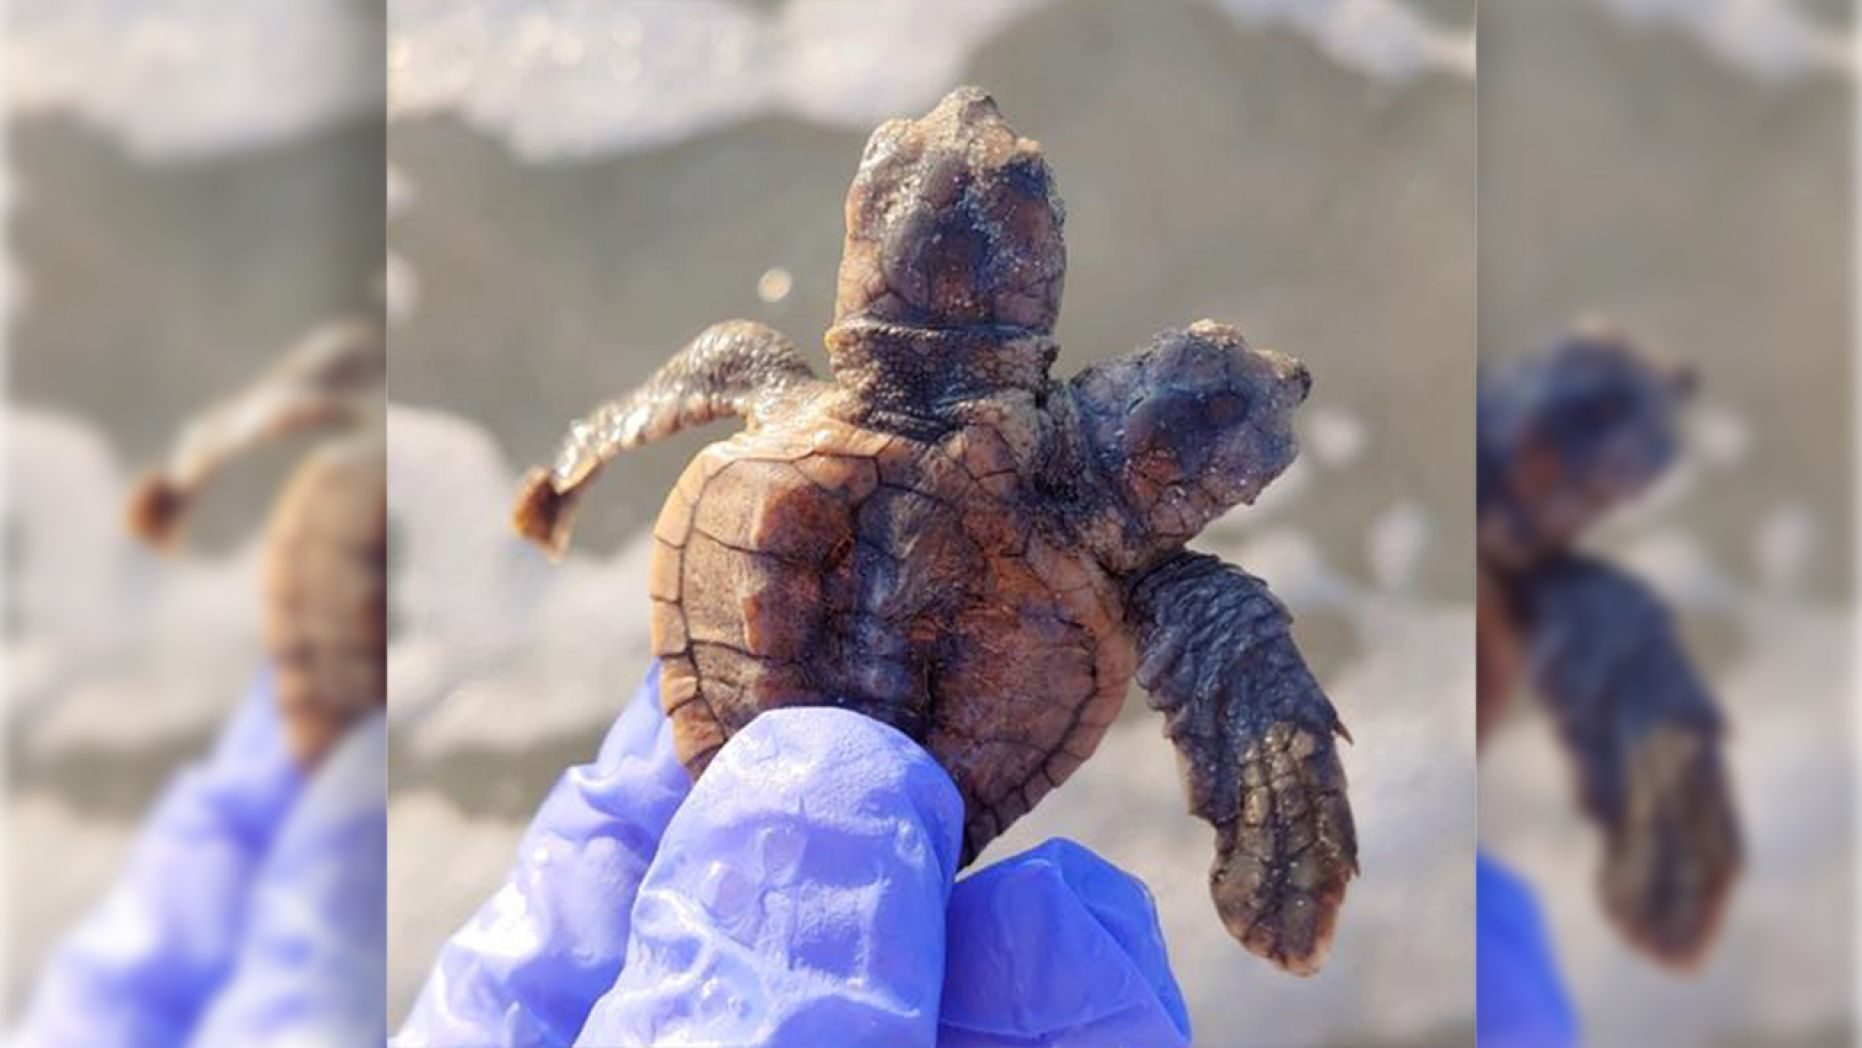 The two-headed turtle stunned researchers.